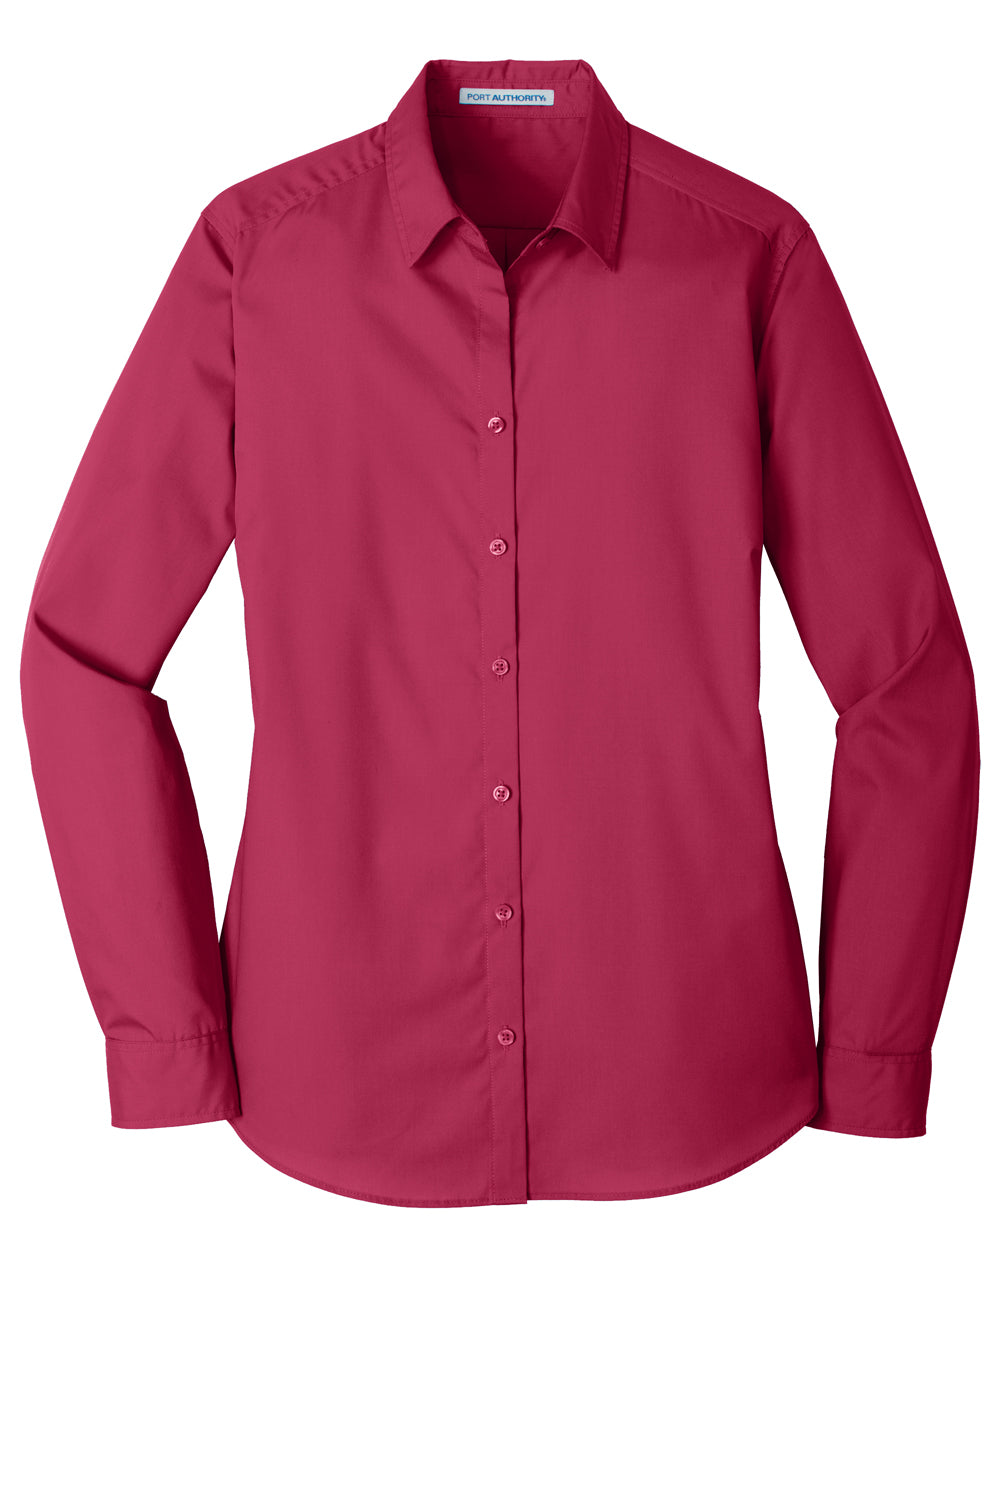 Port Authority LW100 Womens Carefree Stain Resistant Long Sleeve Button Down Shirt Azalea Pink Flat Front